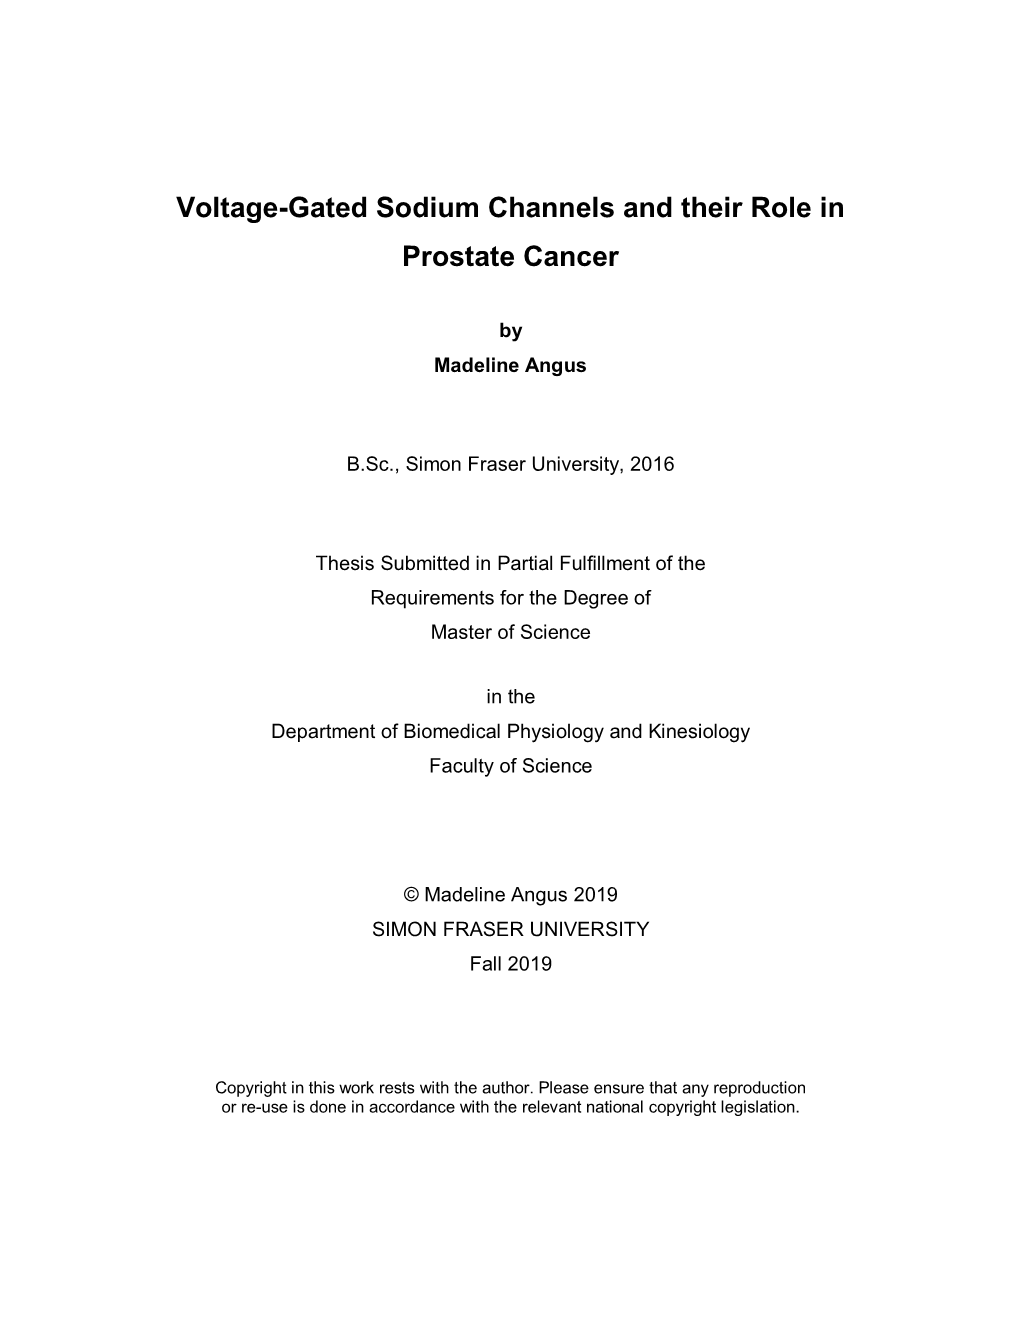 Non-Canonical Functions of Voltage-Gated Sodium Channels